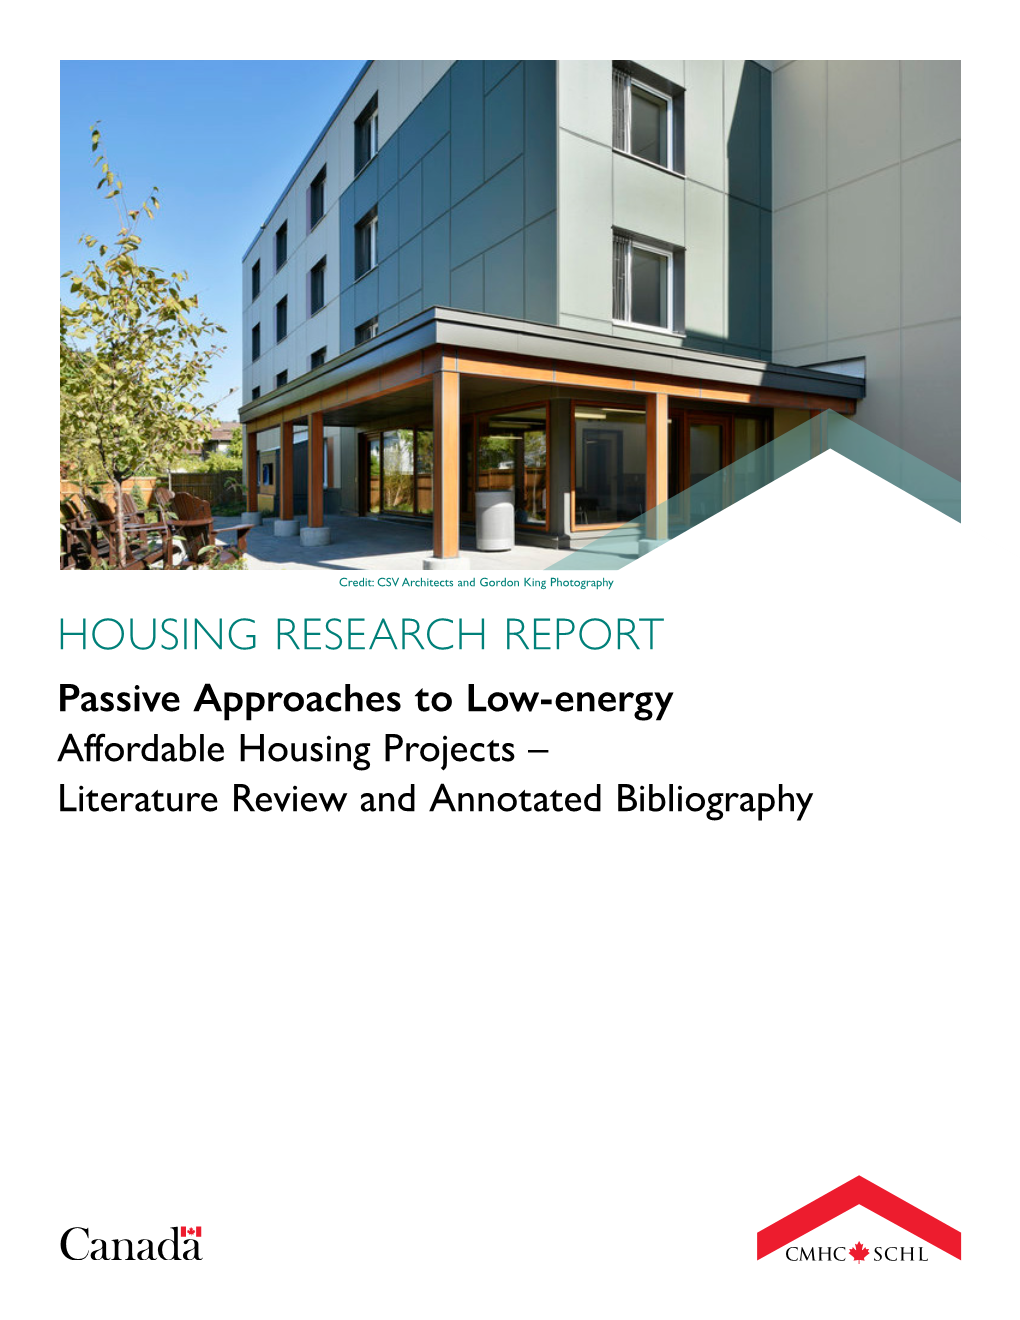 Housing Research Report